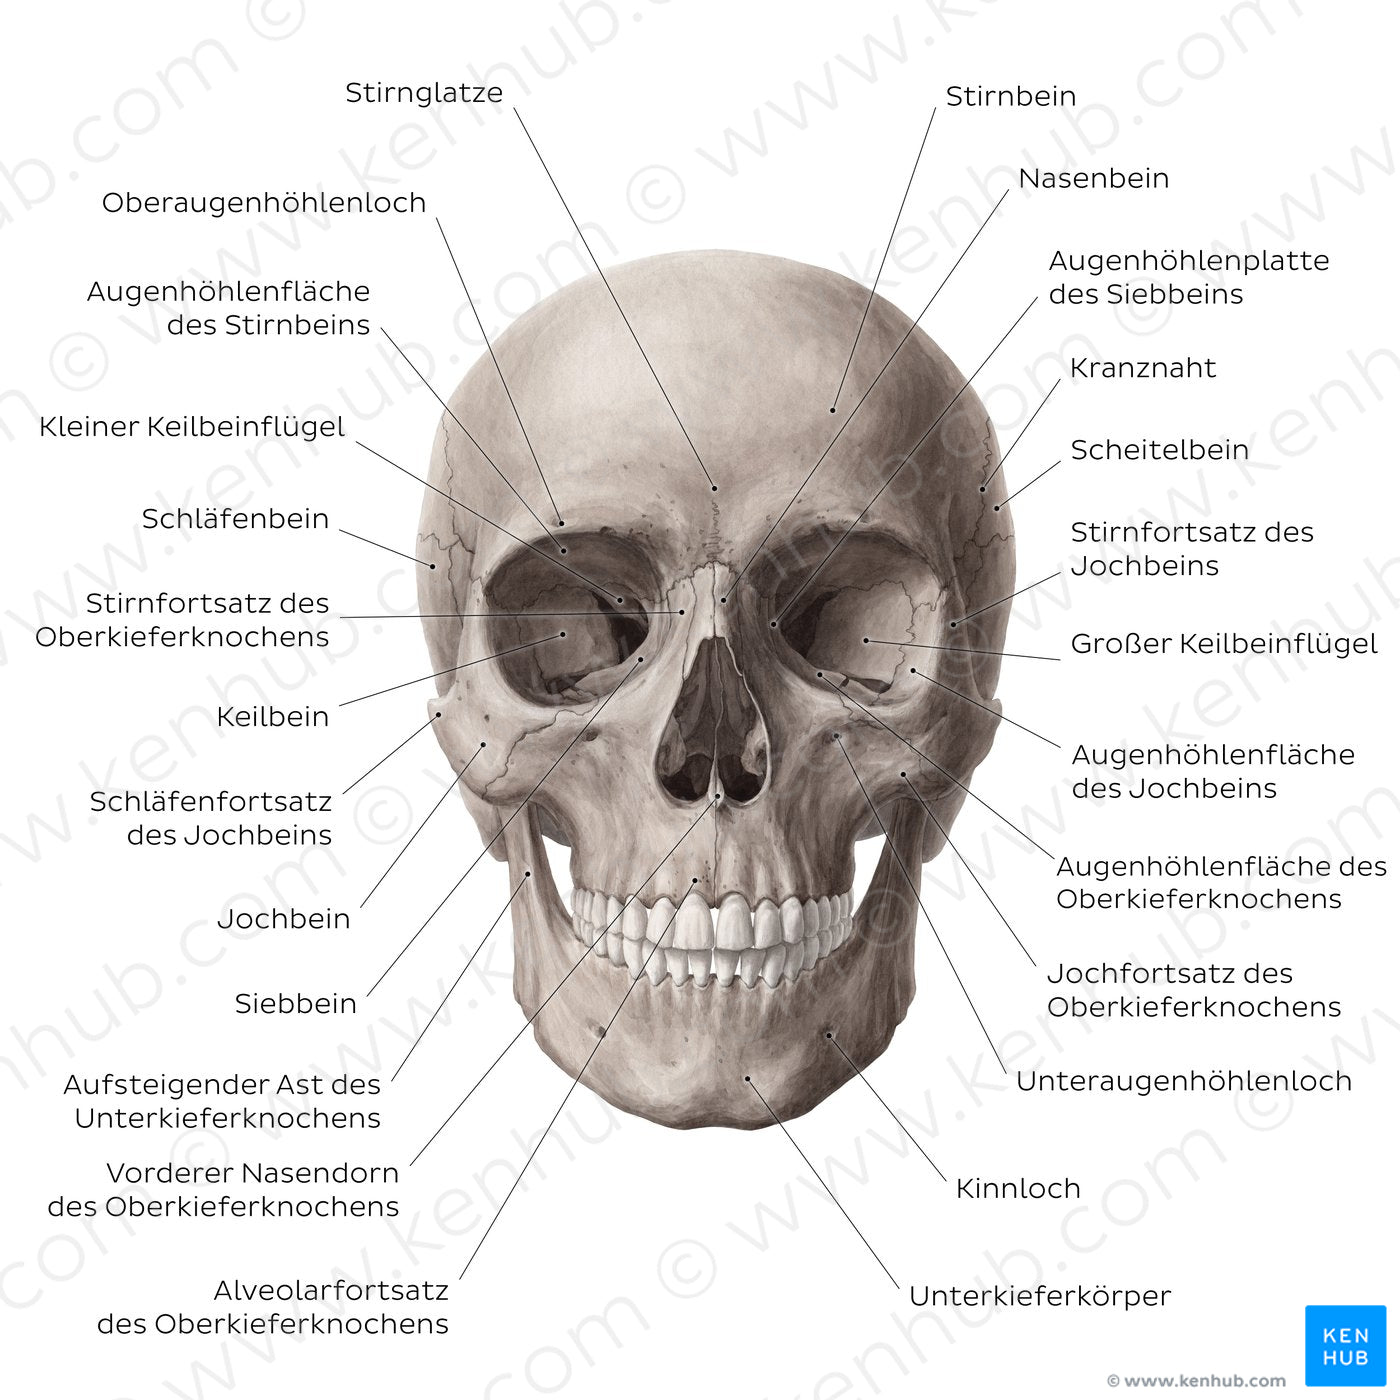 Anterior view of the skull (German)